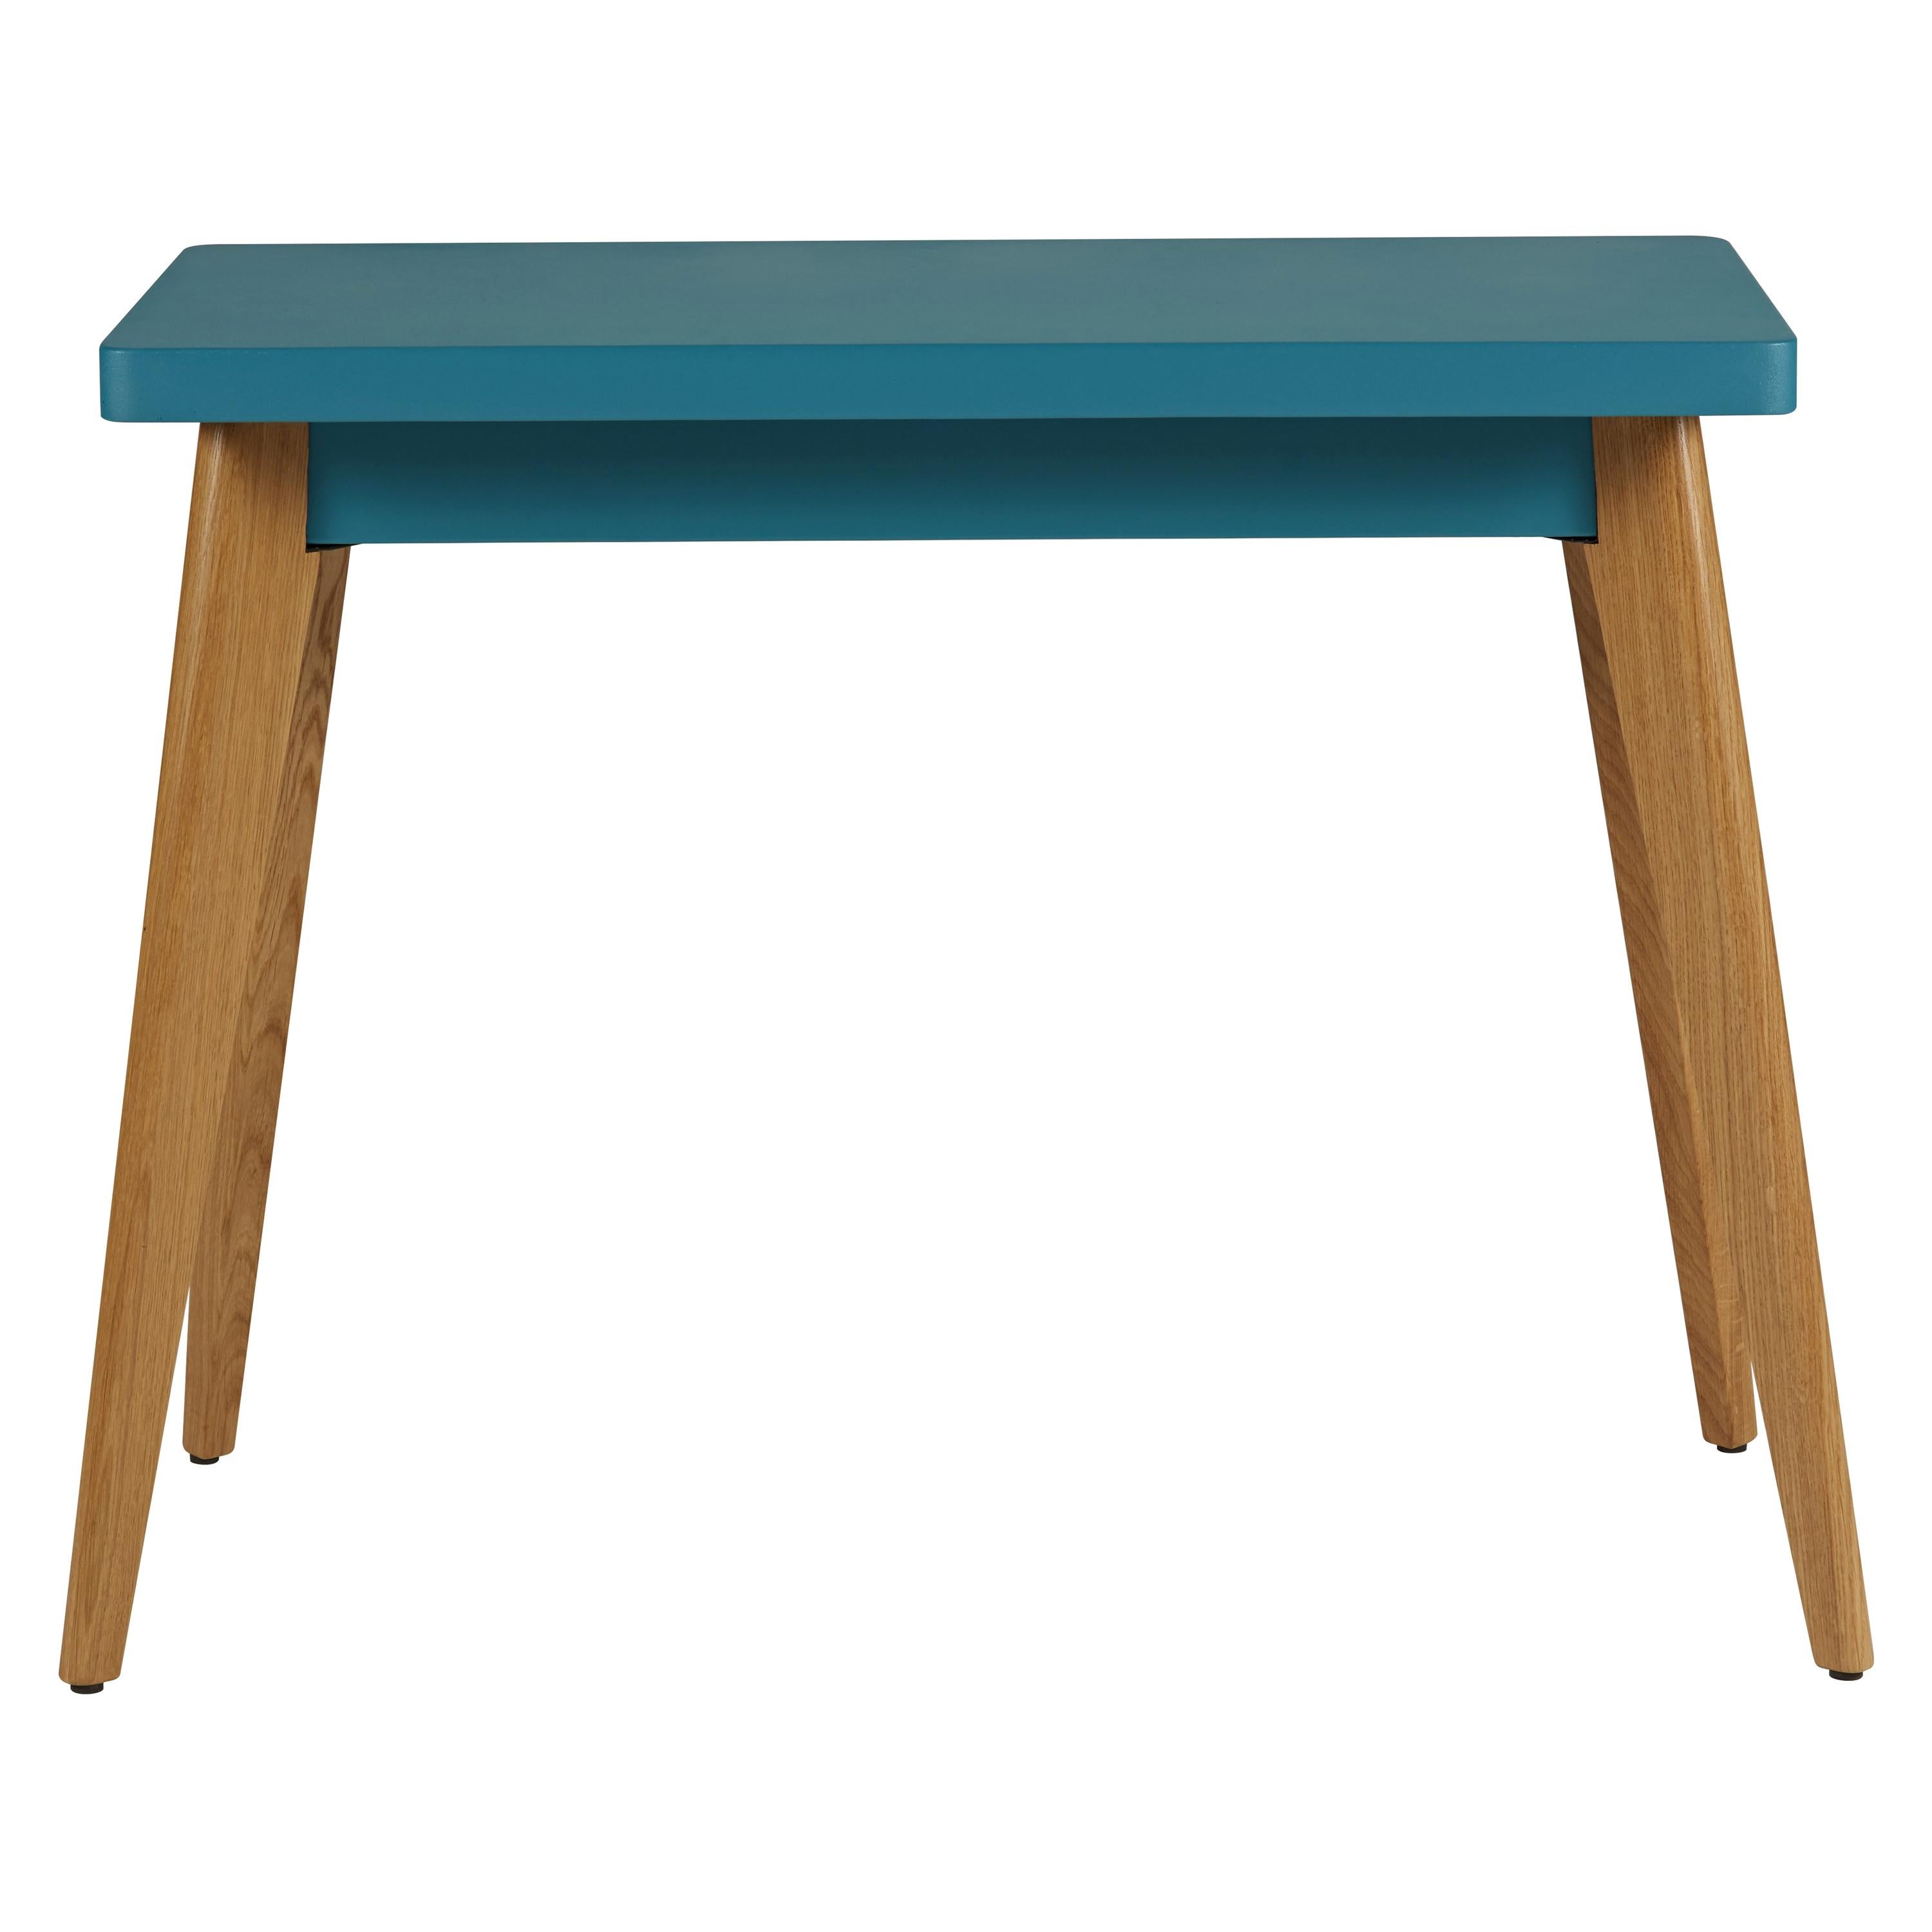 For Sale: Green (Vert Canard) 55 Console Table with Wood Legs in Pop Colors by Jean Pauchard & Tolix